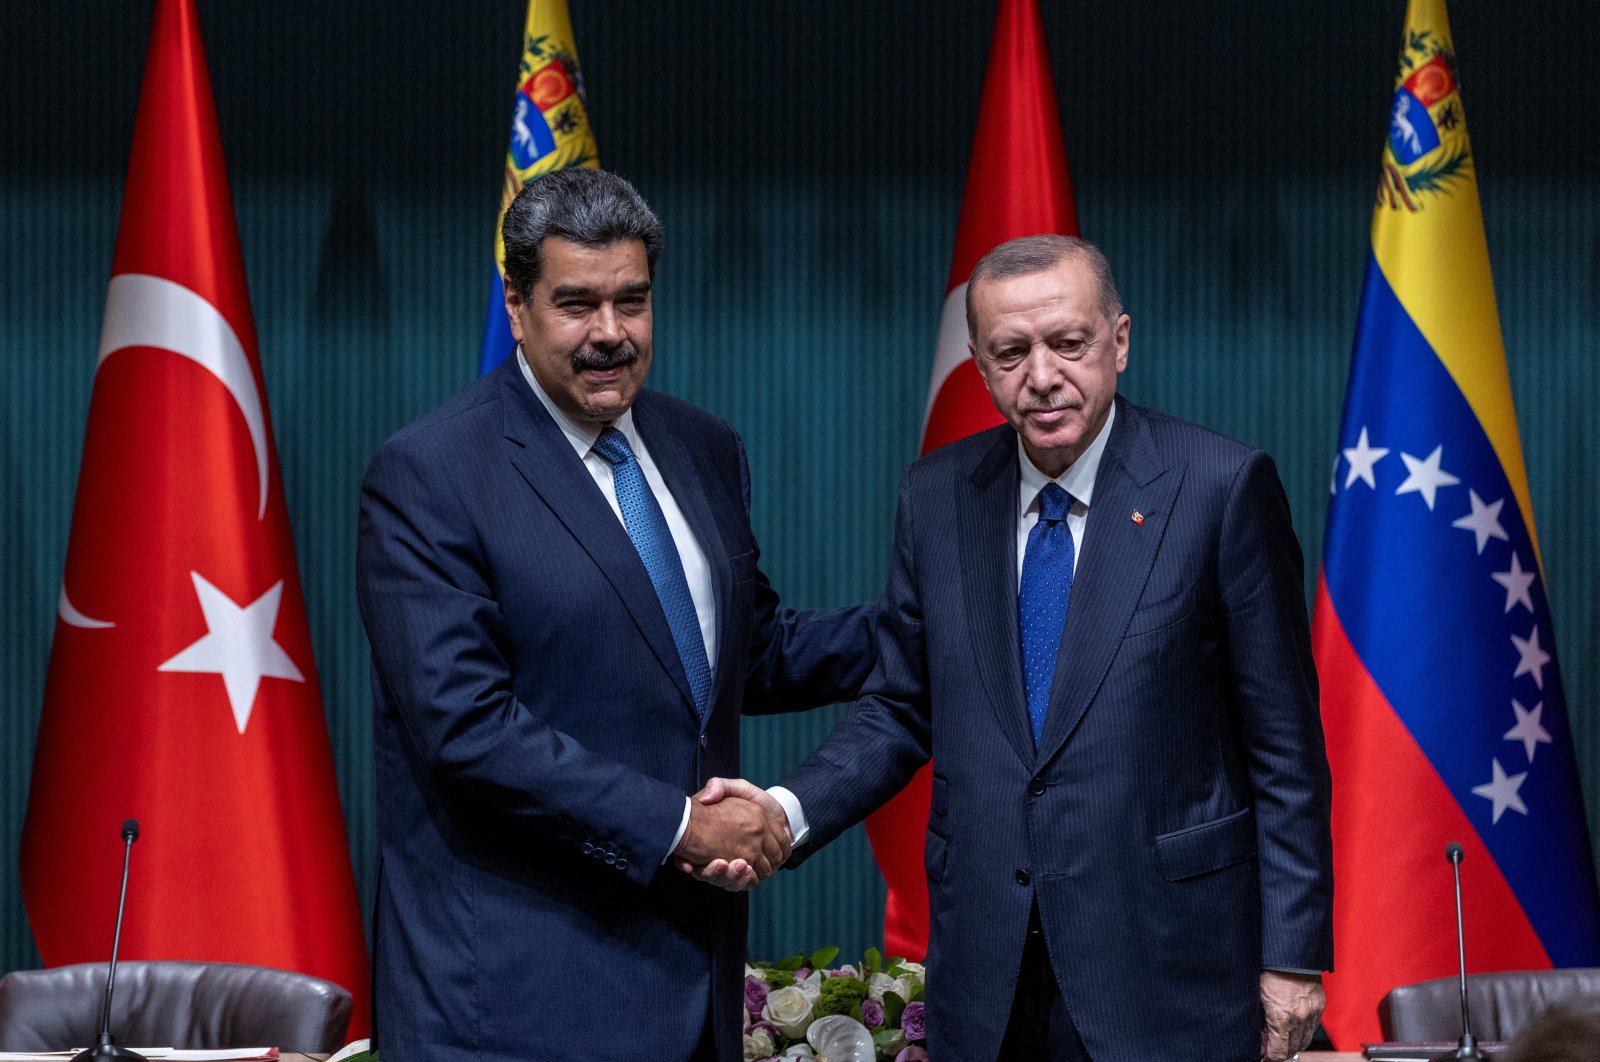 President Tayyip Erdoğan and Venezuela&#039;s President Nicolas Maduro pose after a joint news conference after their meeting in Ankara, Turkey, June 8, 2022. (Reuters Photo)